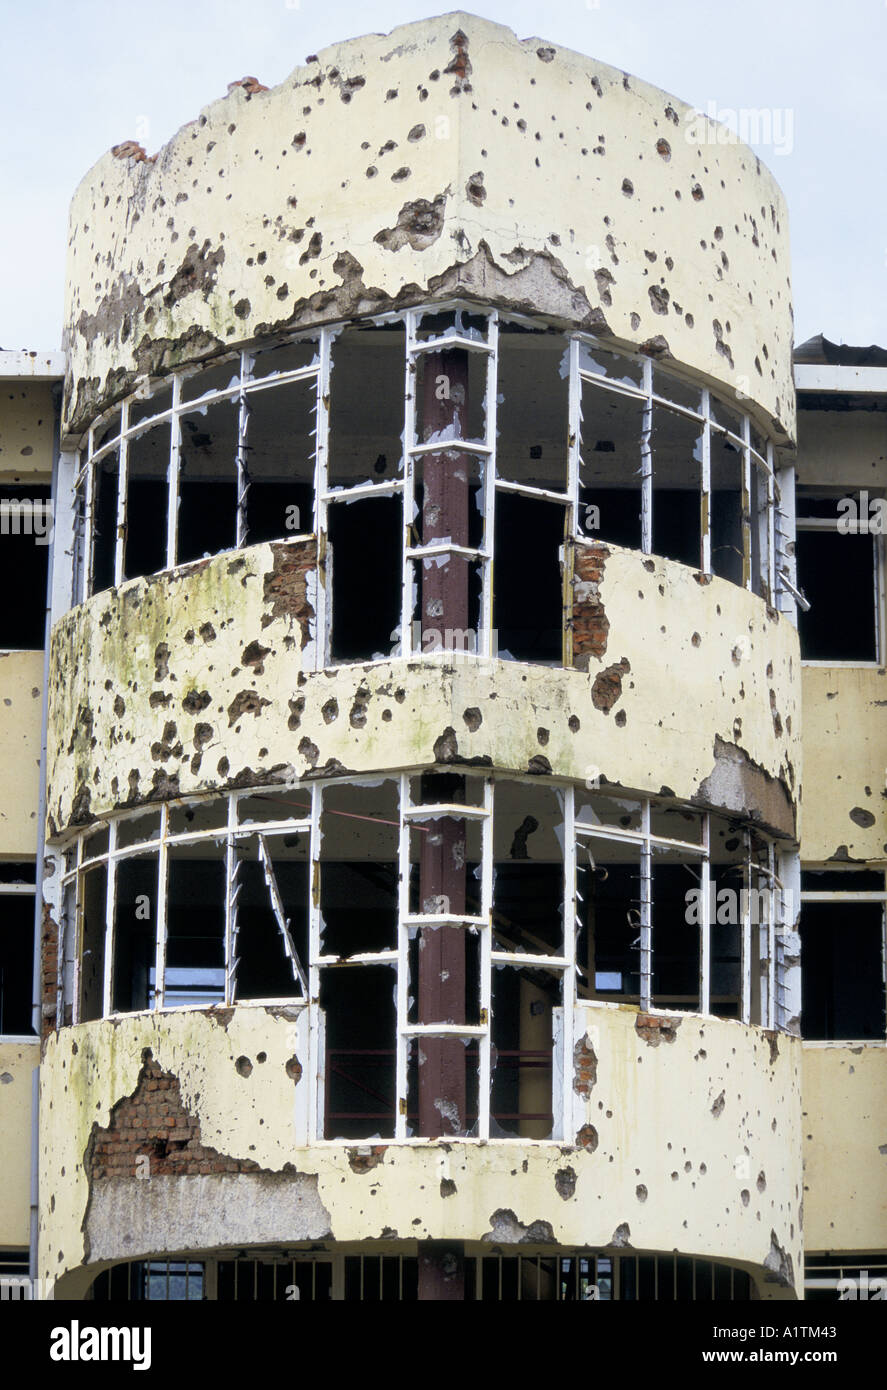 DAMAGED BUILDING, ITS WINDOWS SHATTERED, OUTER WALLS PITTED BY MACHINE GUN BULLET MARKS AND SHELLFIRE IN KIGALI Stock Photo